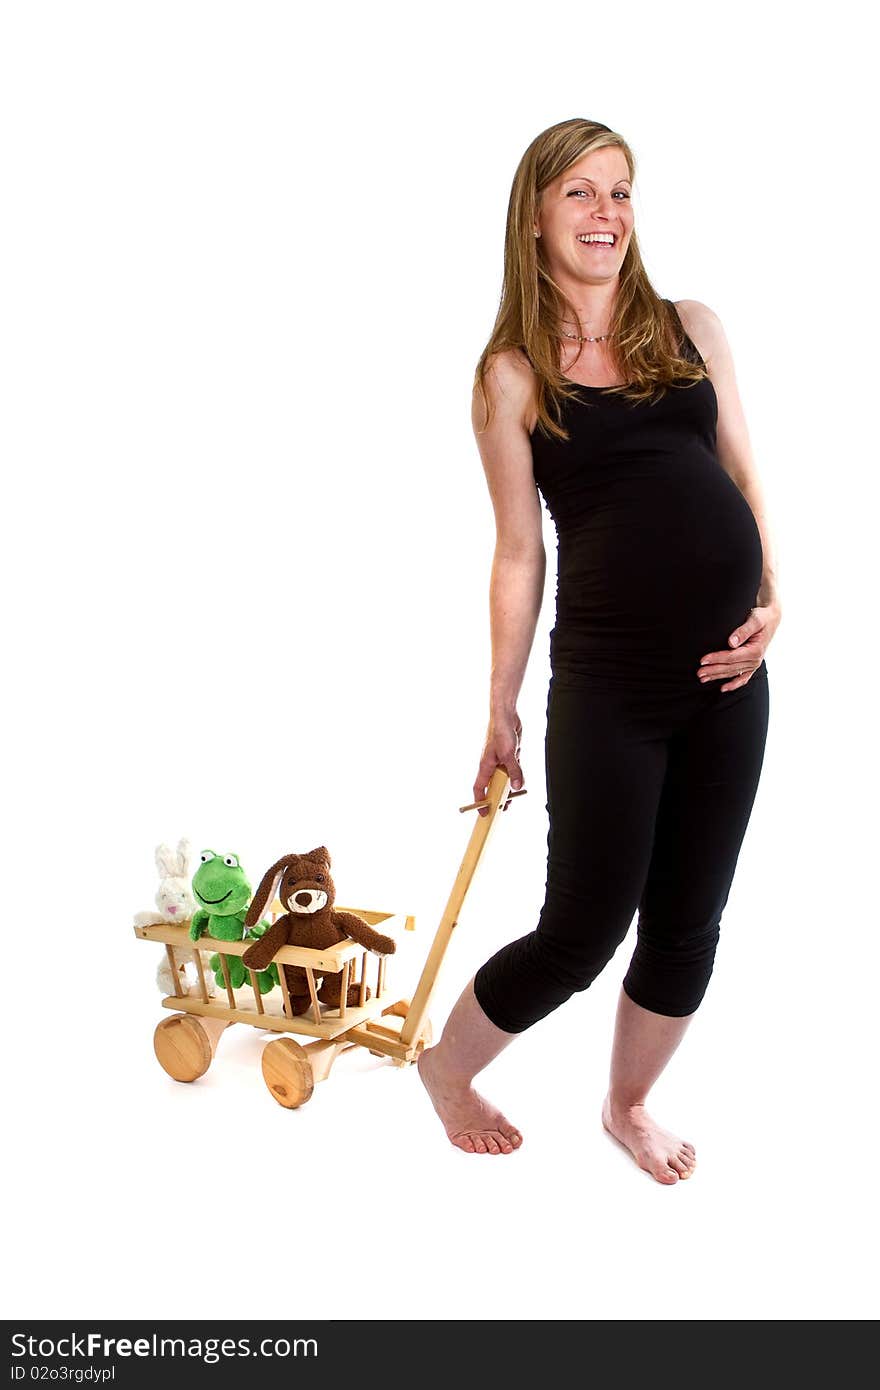 Young fresh pregnant woman is pulling a trolley filled with toy animals isolated over white background. Young fresh pregnant woman is pulling a trolley filled with toy animals isolated over white background.